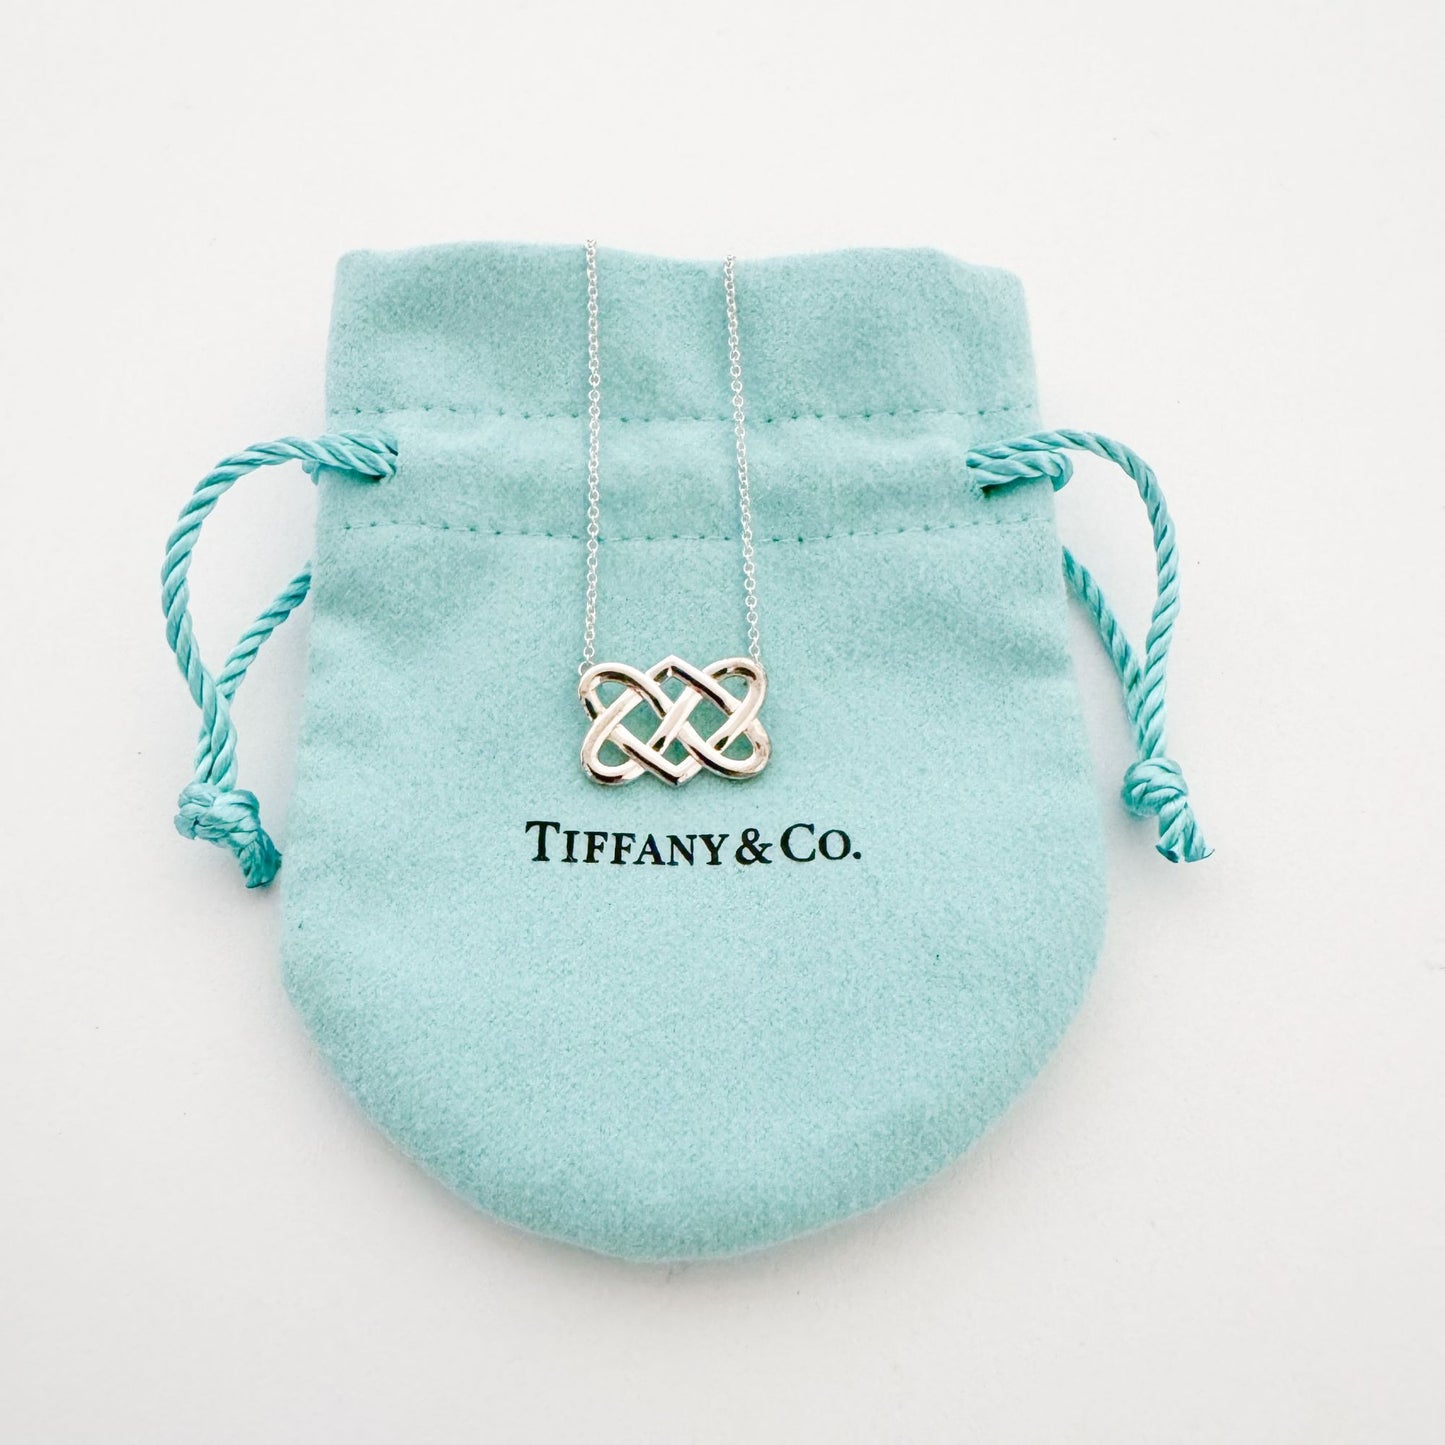 Tiffany & Co. Paloma Picasso Celtic Knot Necklace in Sterling Silver